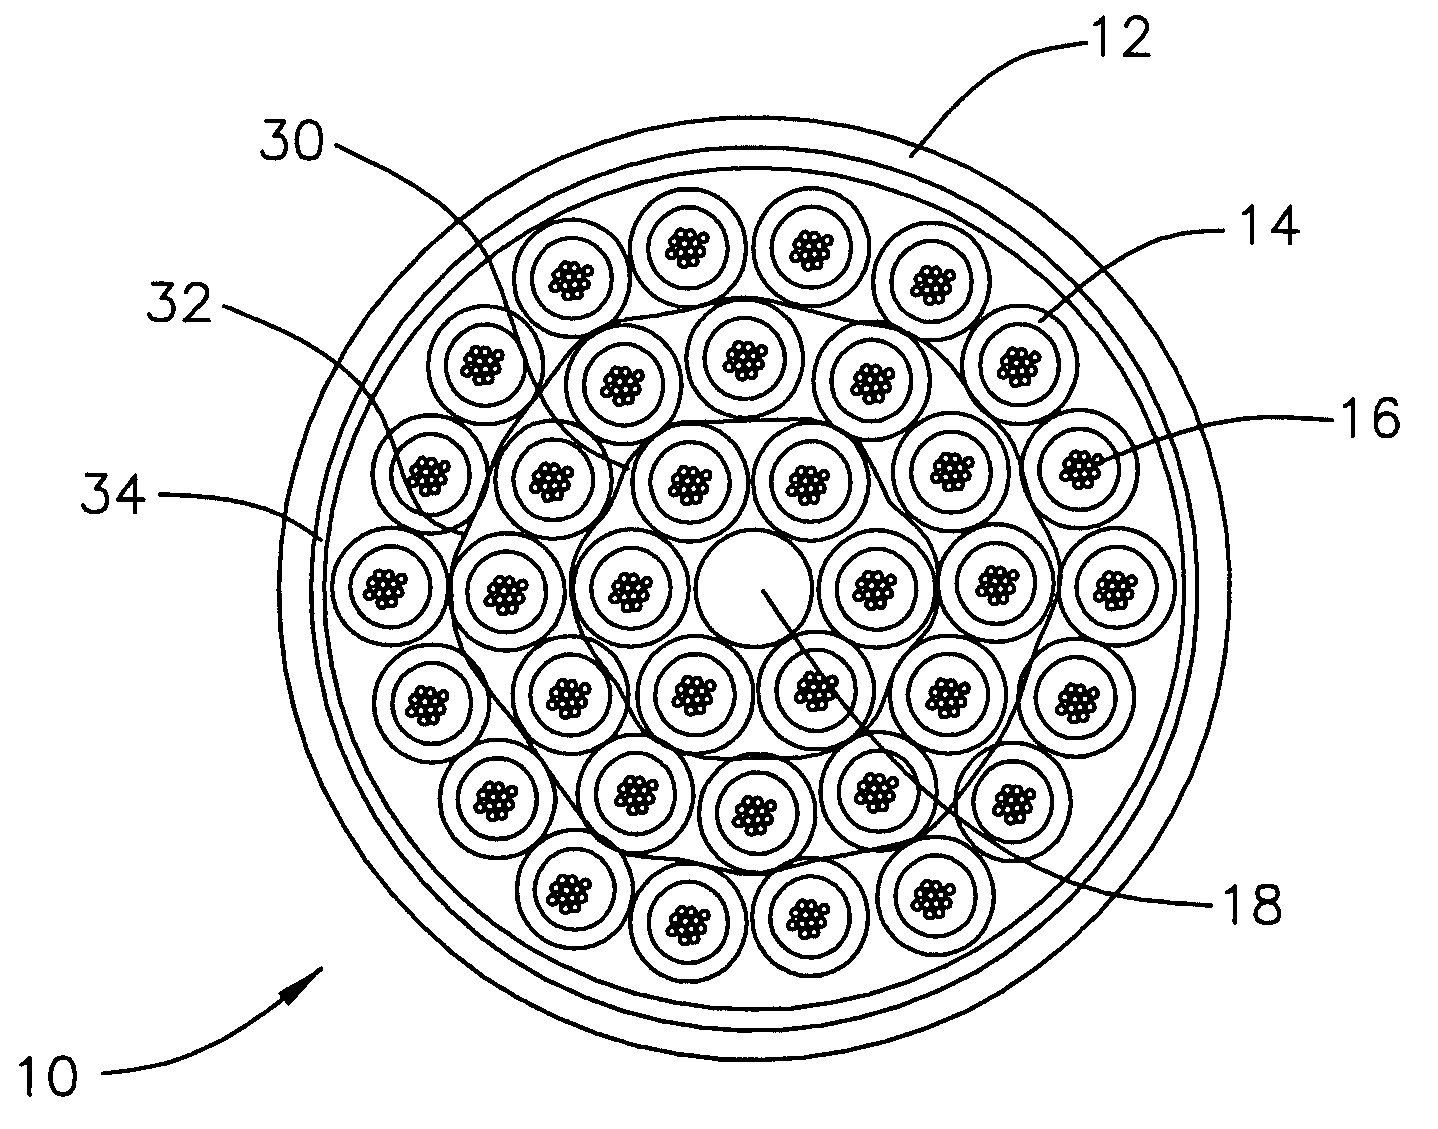 Optical fiber cable with system and method for mid-span access